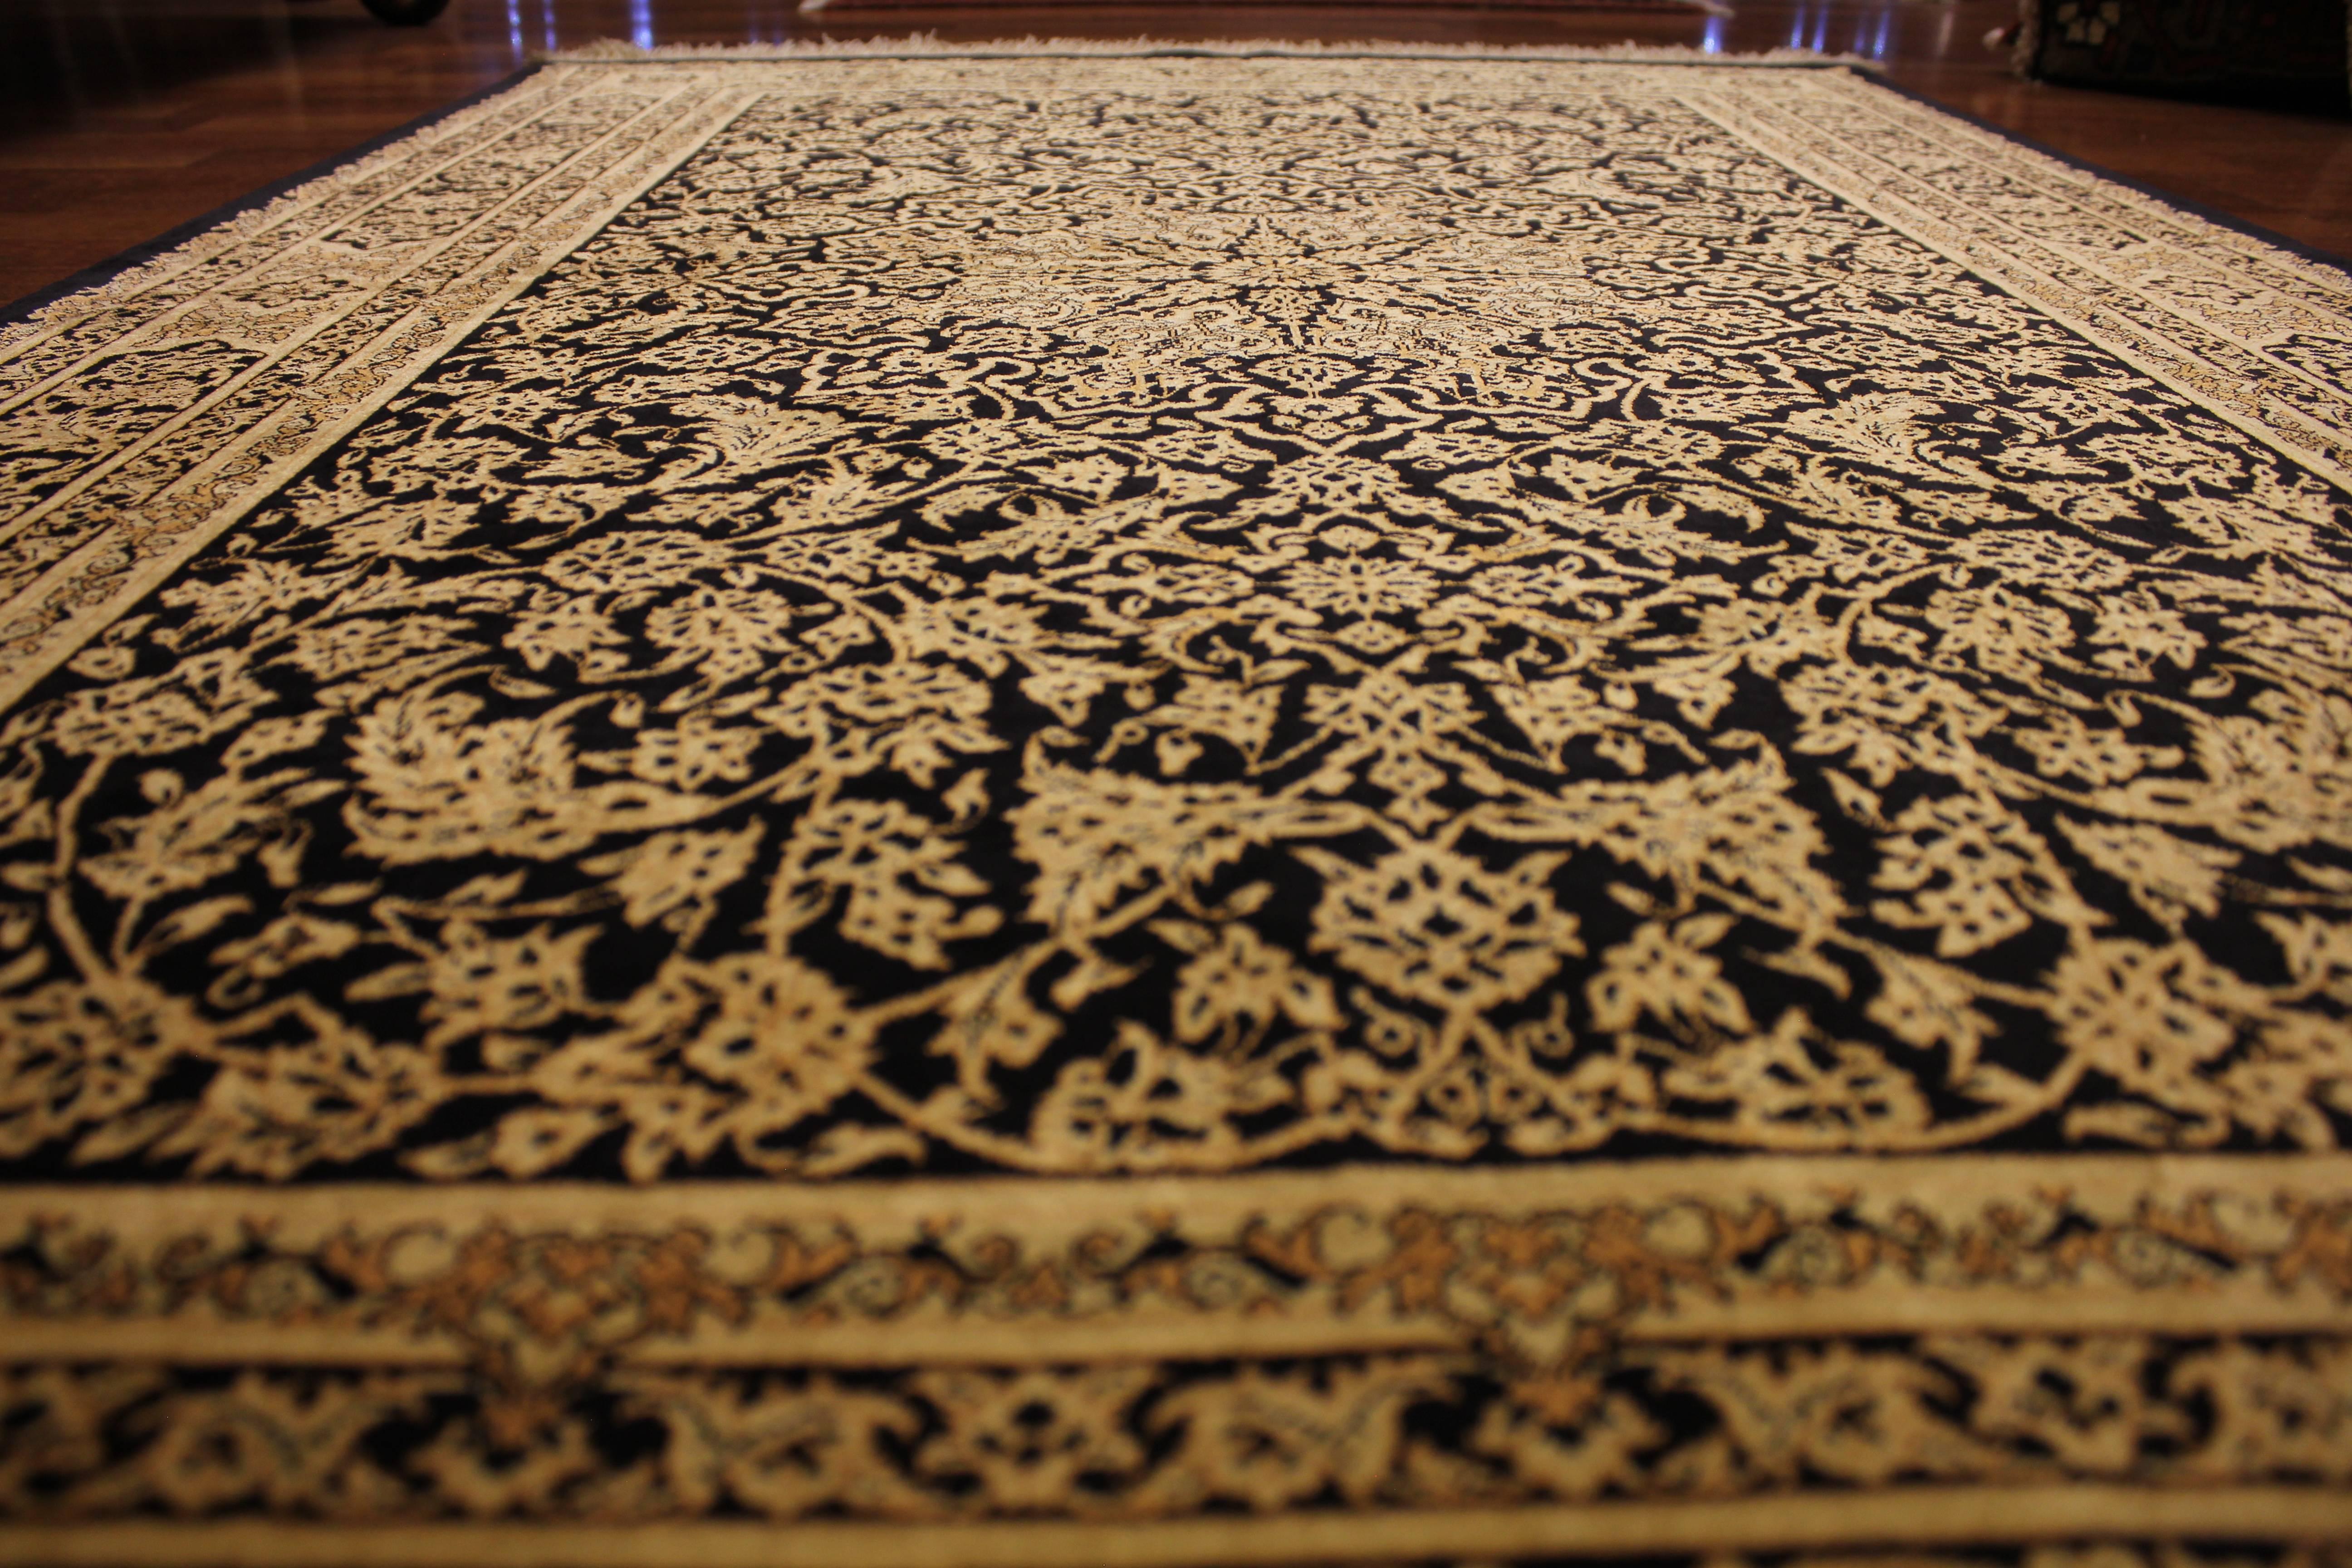 Extraordinary Qom, from Persia, original Qom, holy city of Iran, excellent gold and black colors and condition. Very fine knotted, all silk, silk warp.
Age: Late 20th century.
Material: Silk.
Size: 150 x 100 cm (4.9 x 3.2 ft).
Condition: